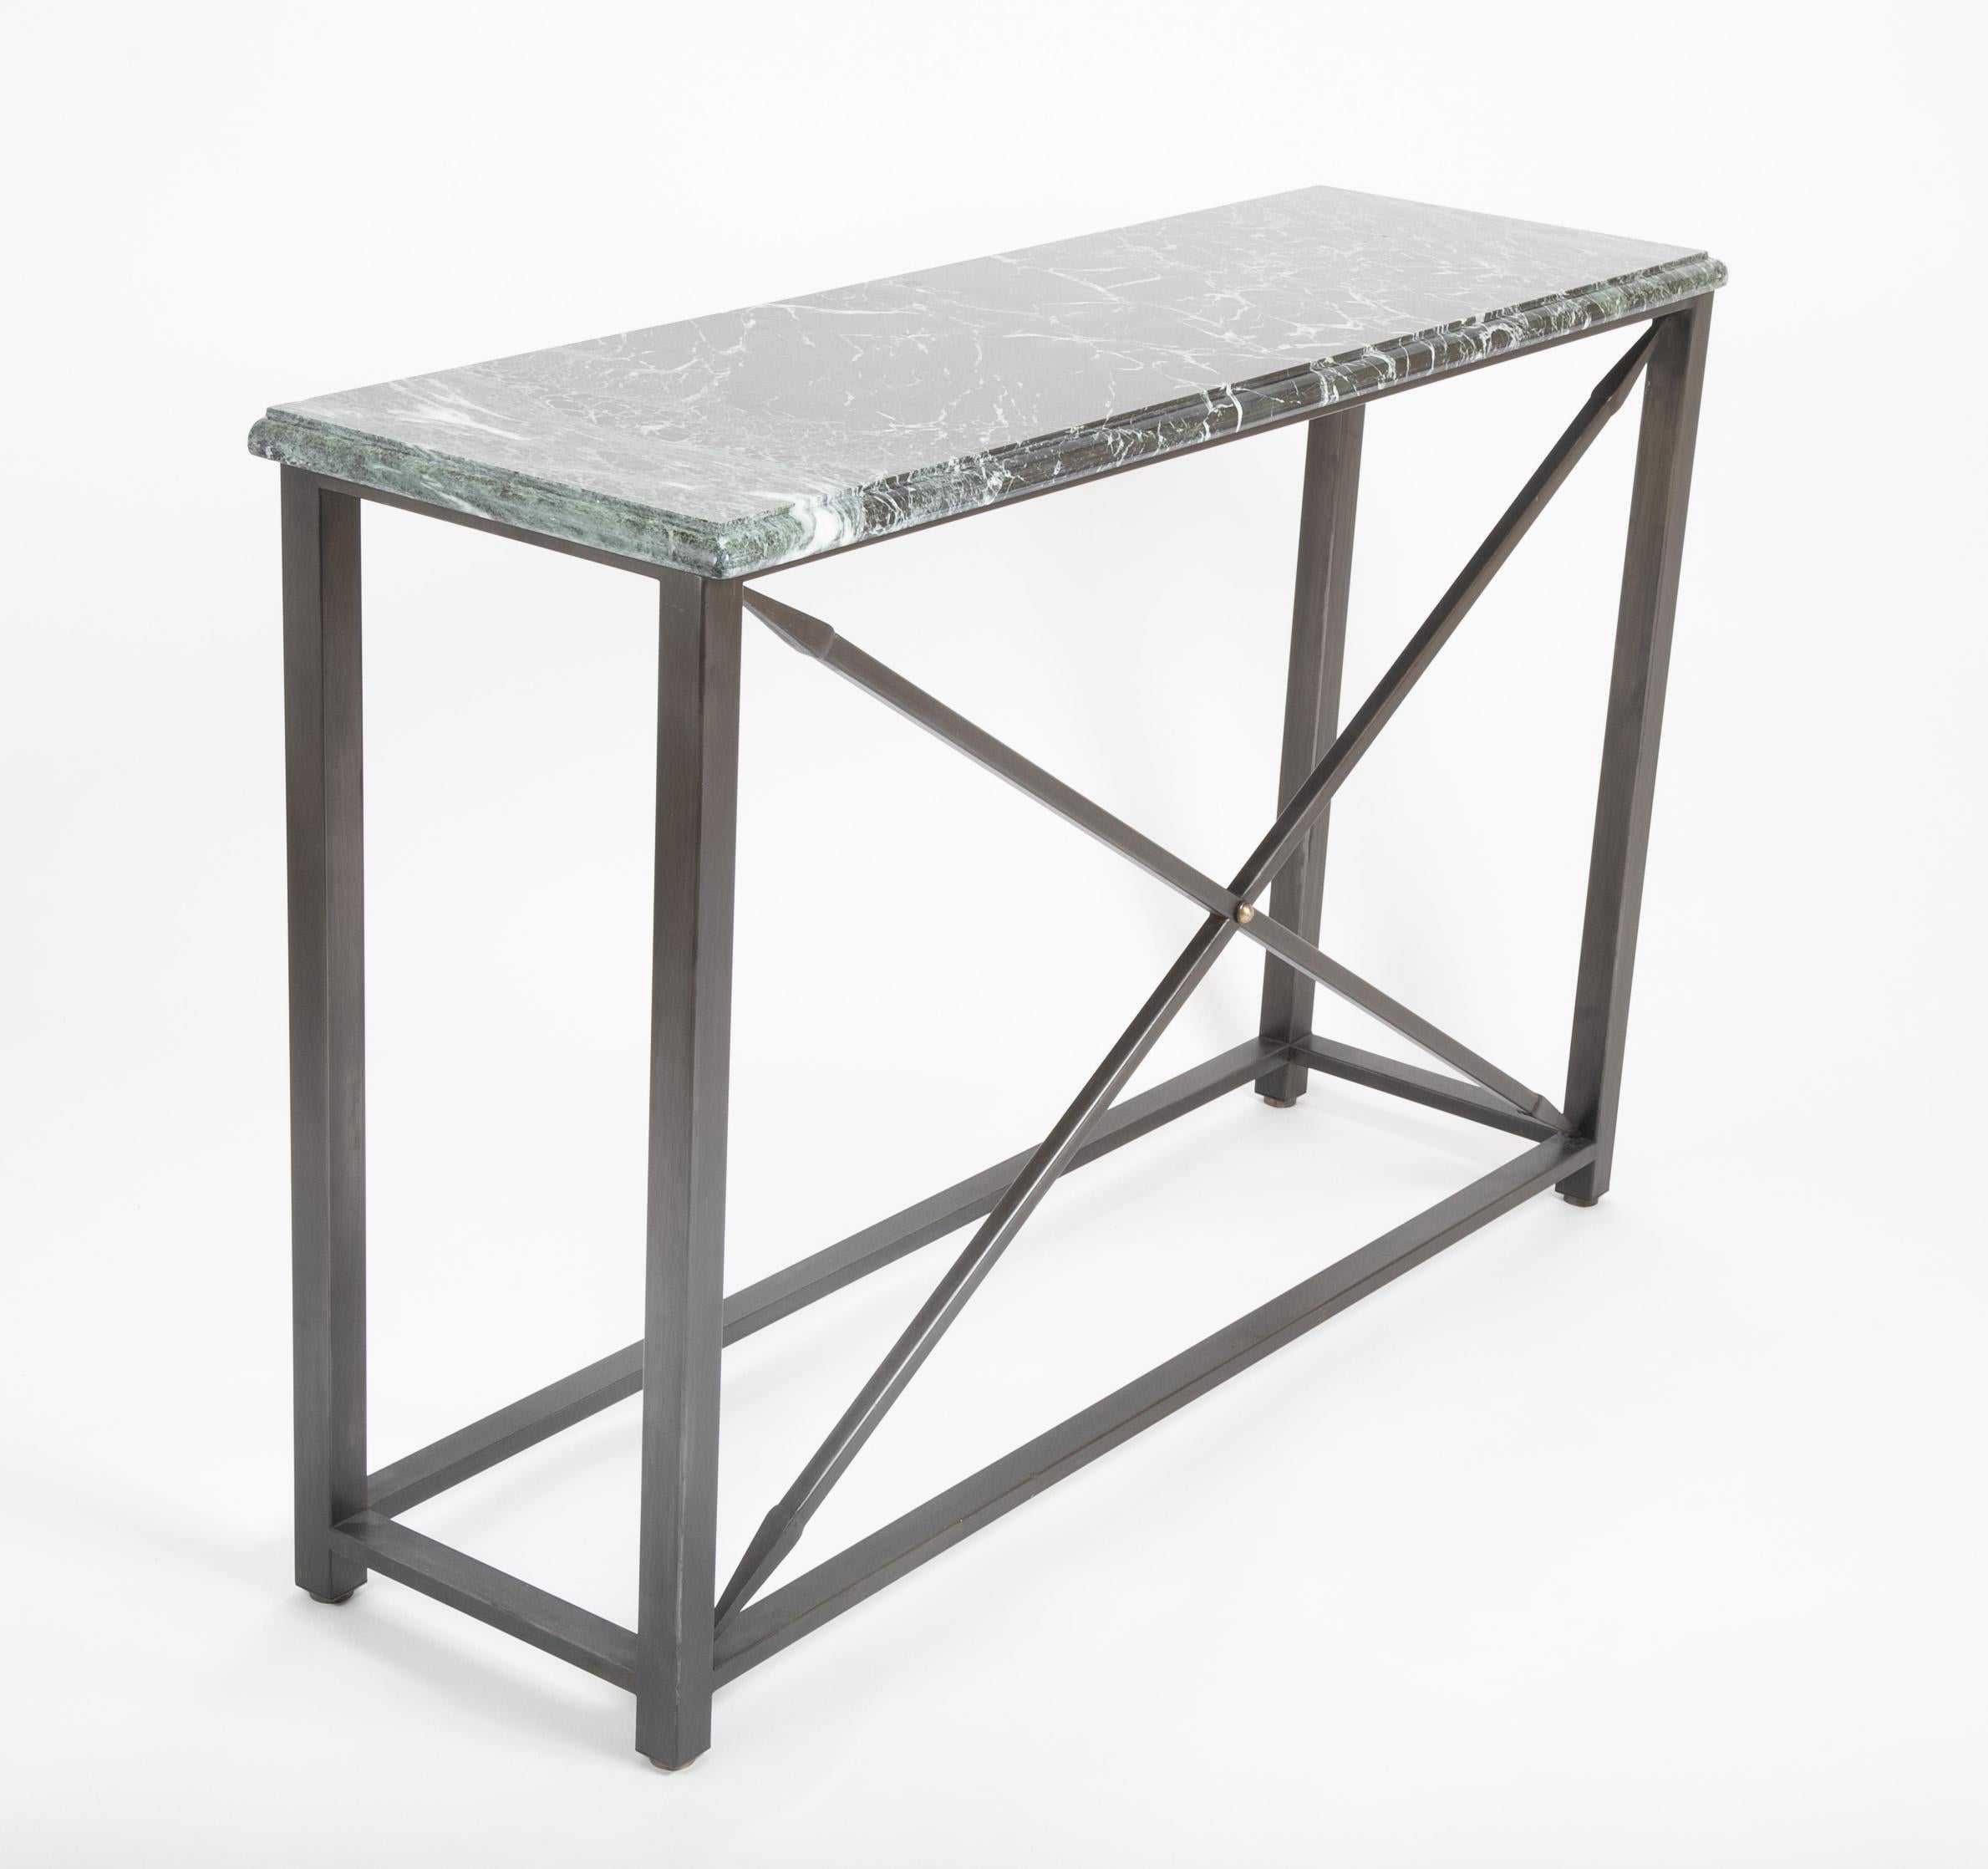 Custom made pair of Neoclassical style console tables with steel X-form bases topped with very handsome Verdi Antico marble. The deep green marble veined with white carved with ogee edge. The X-form stretchers with spear heads on both ends. A clean,